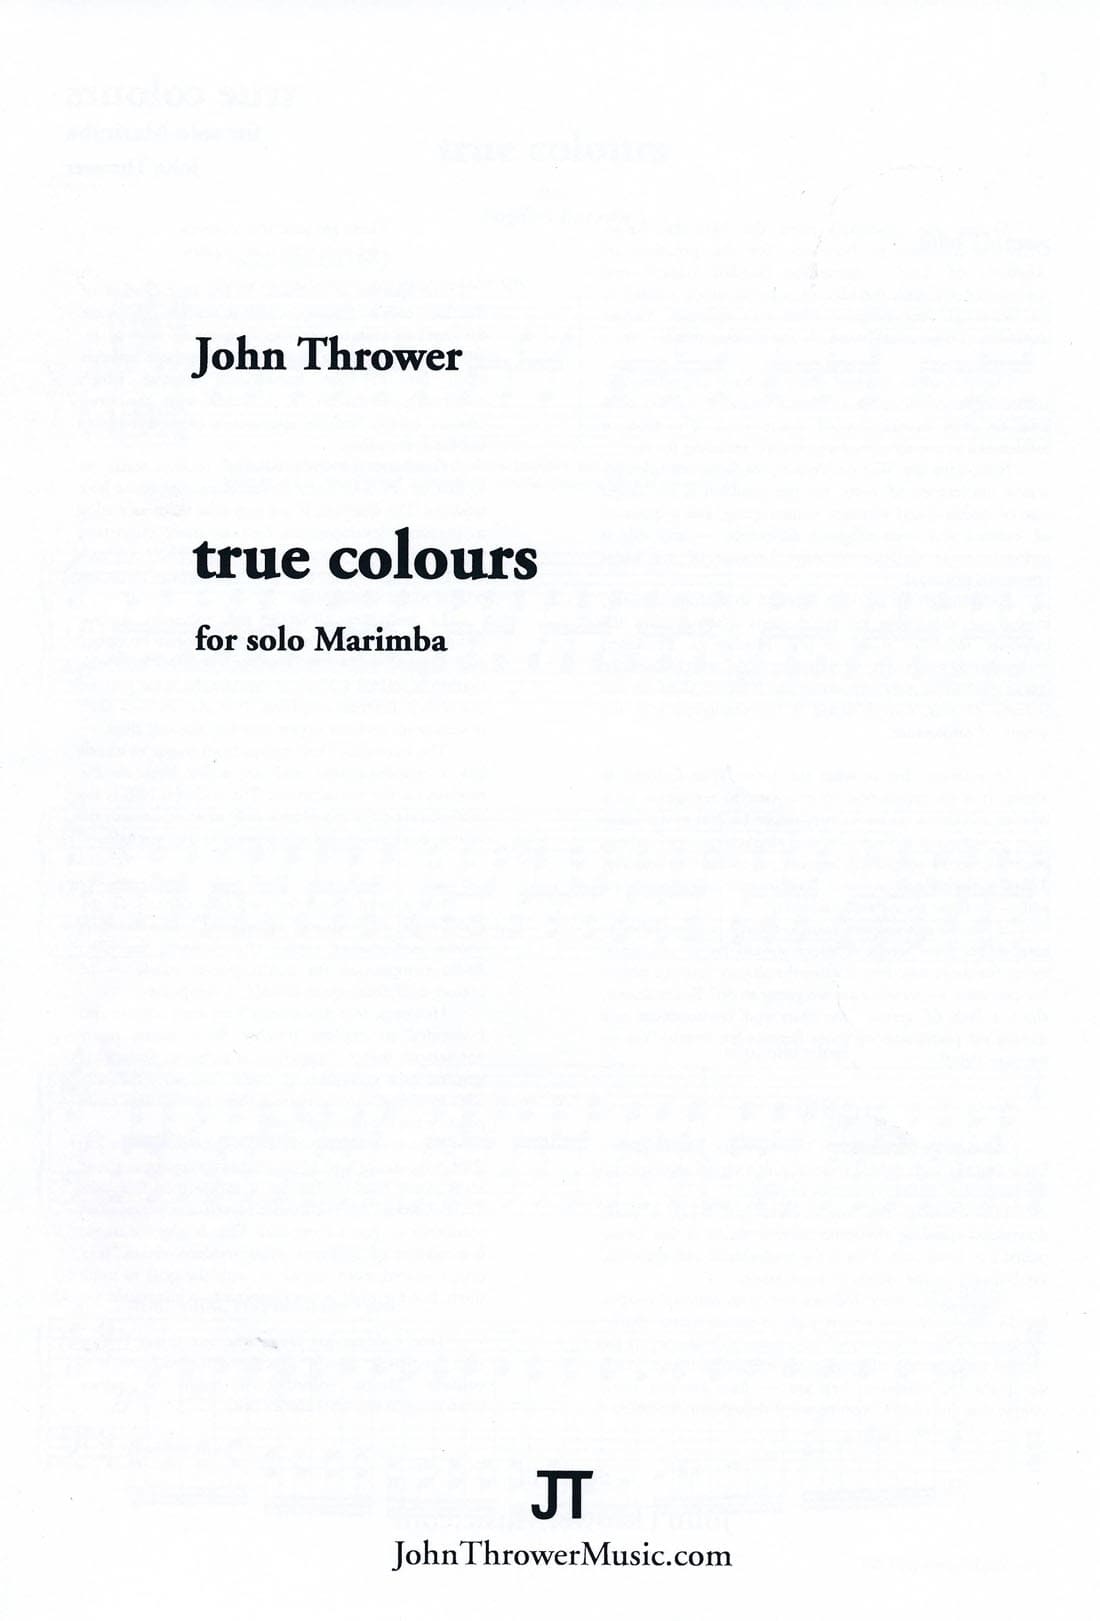 True Colours by John Thrower